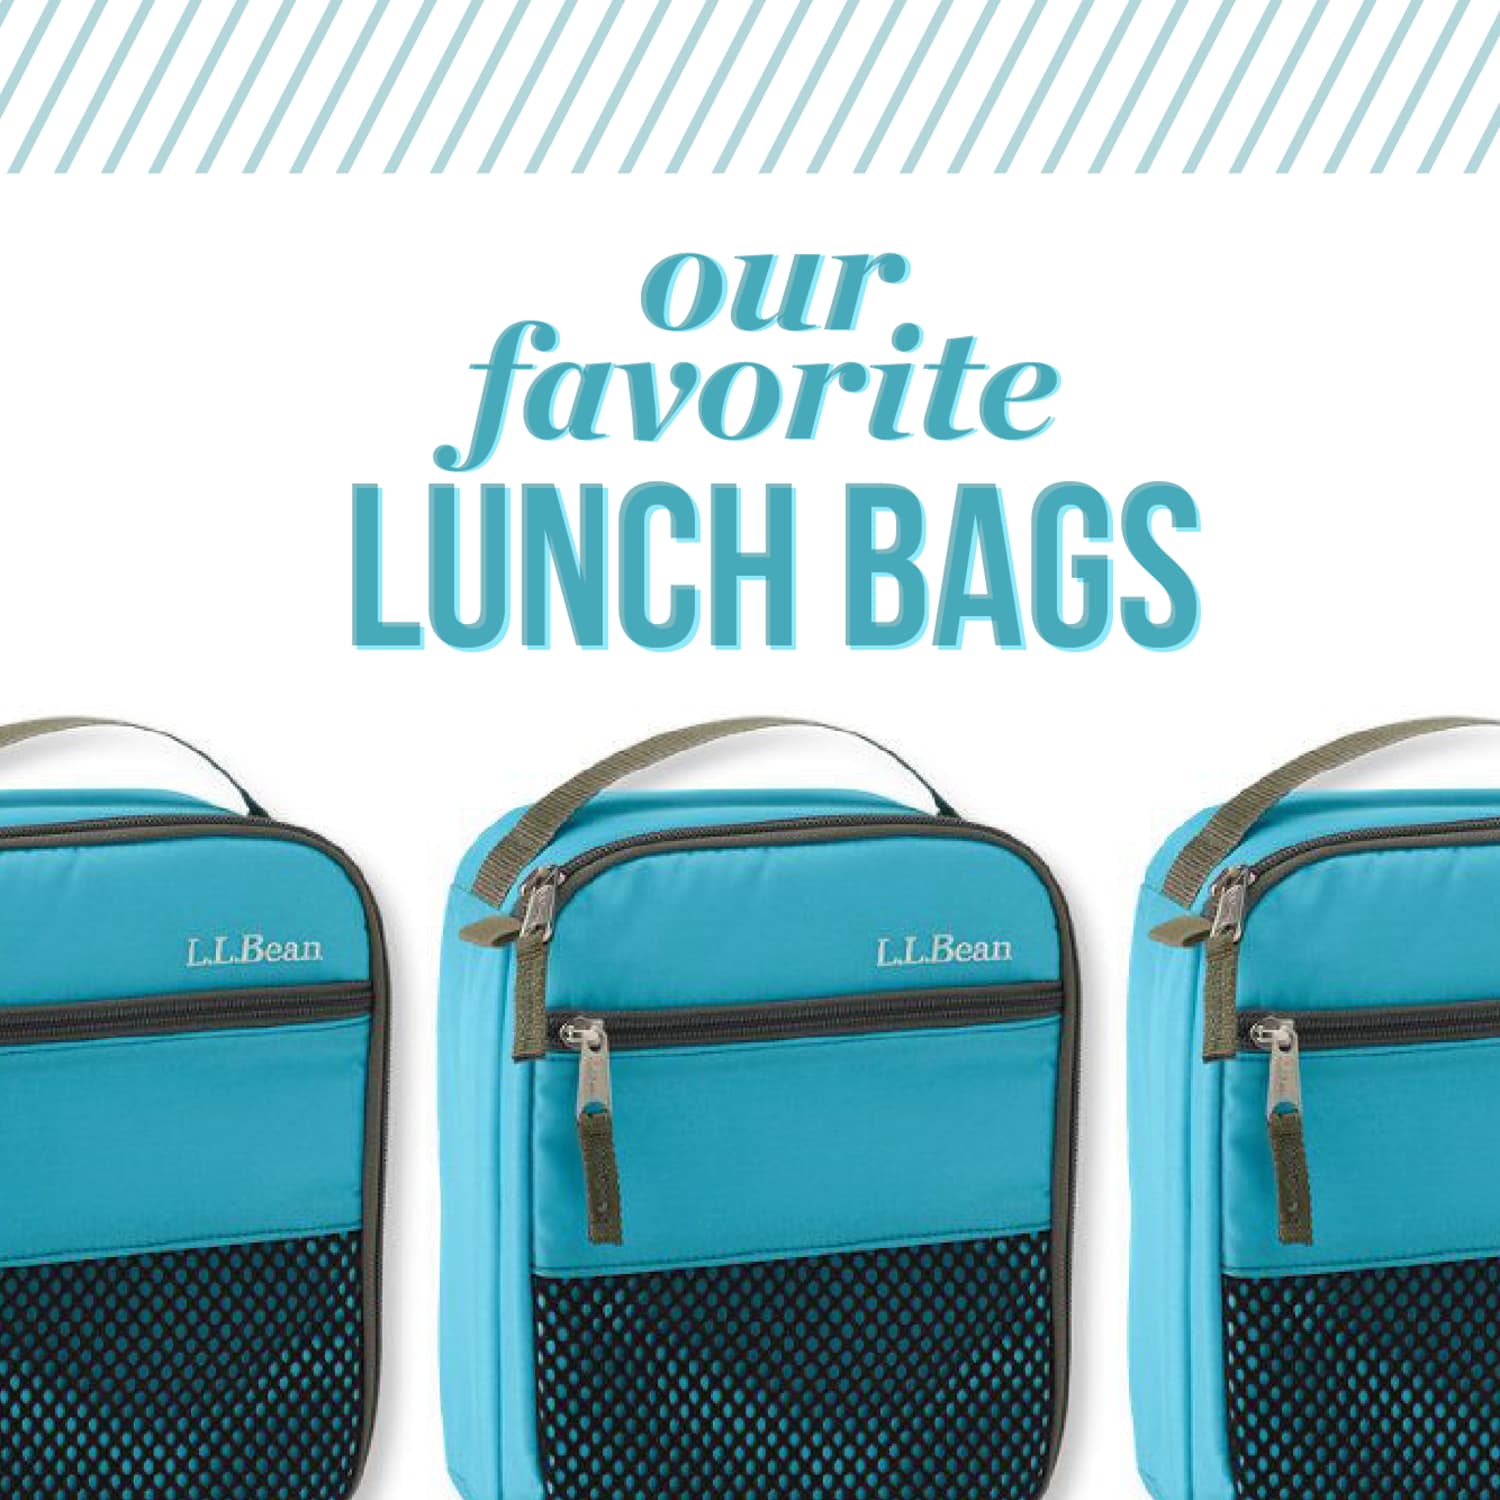 7 Stylish Lunch Bags For Adults, From Large To Small Totes